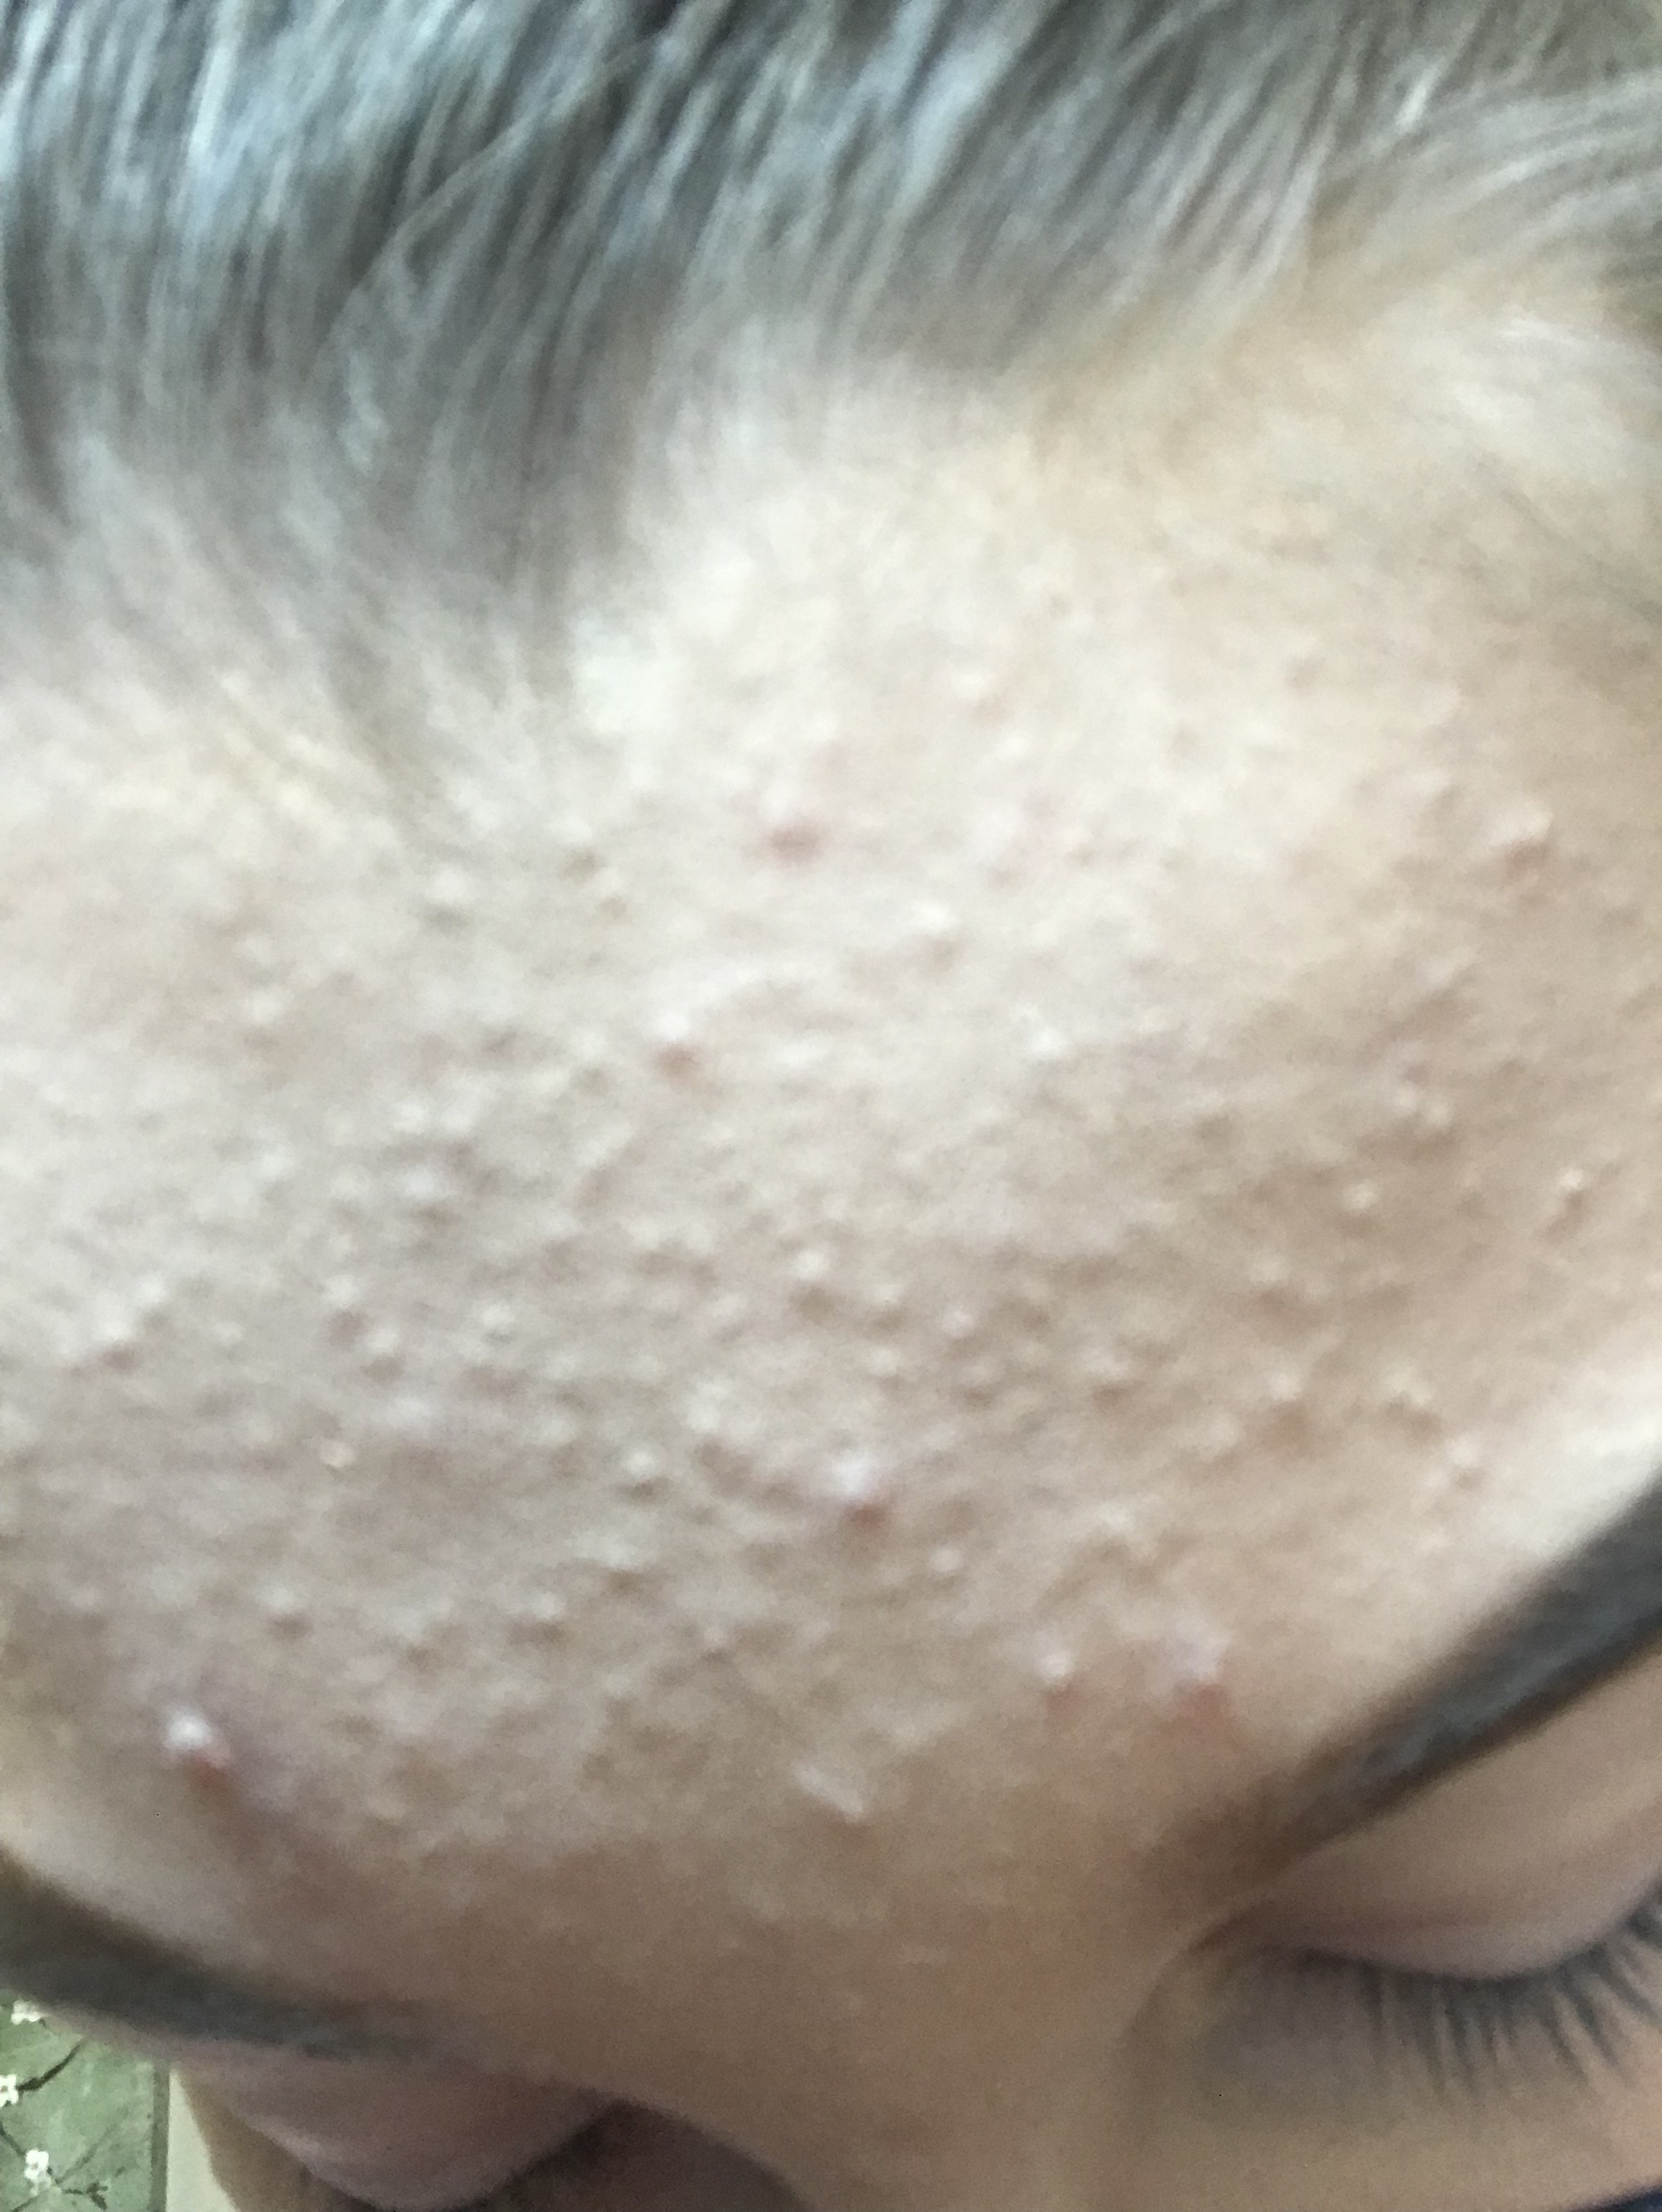 Tiny Bumps All Over Forehead General Acne Discussion